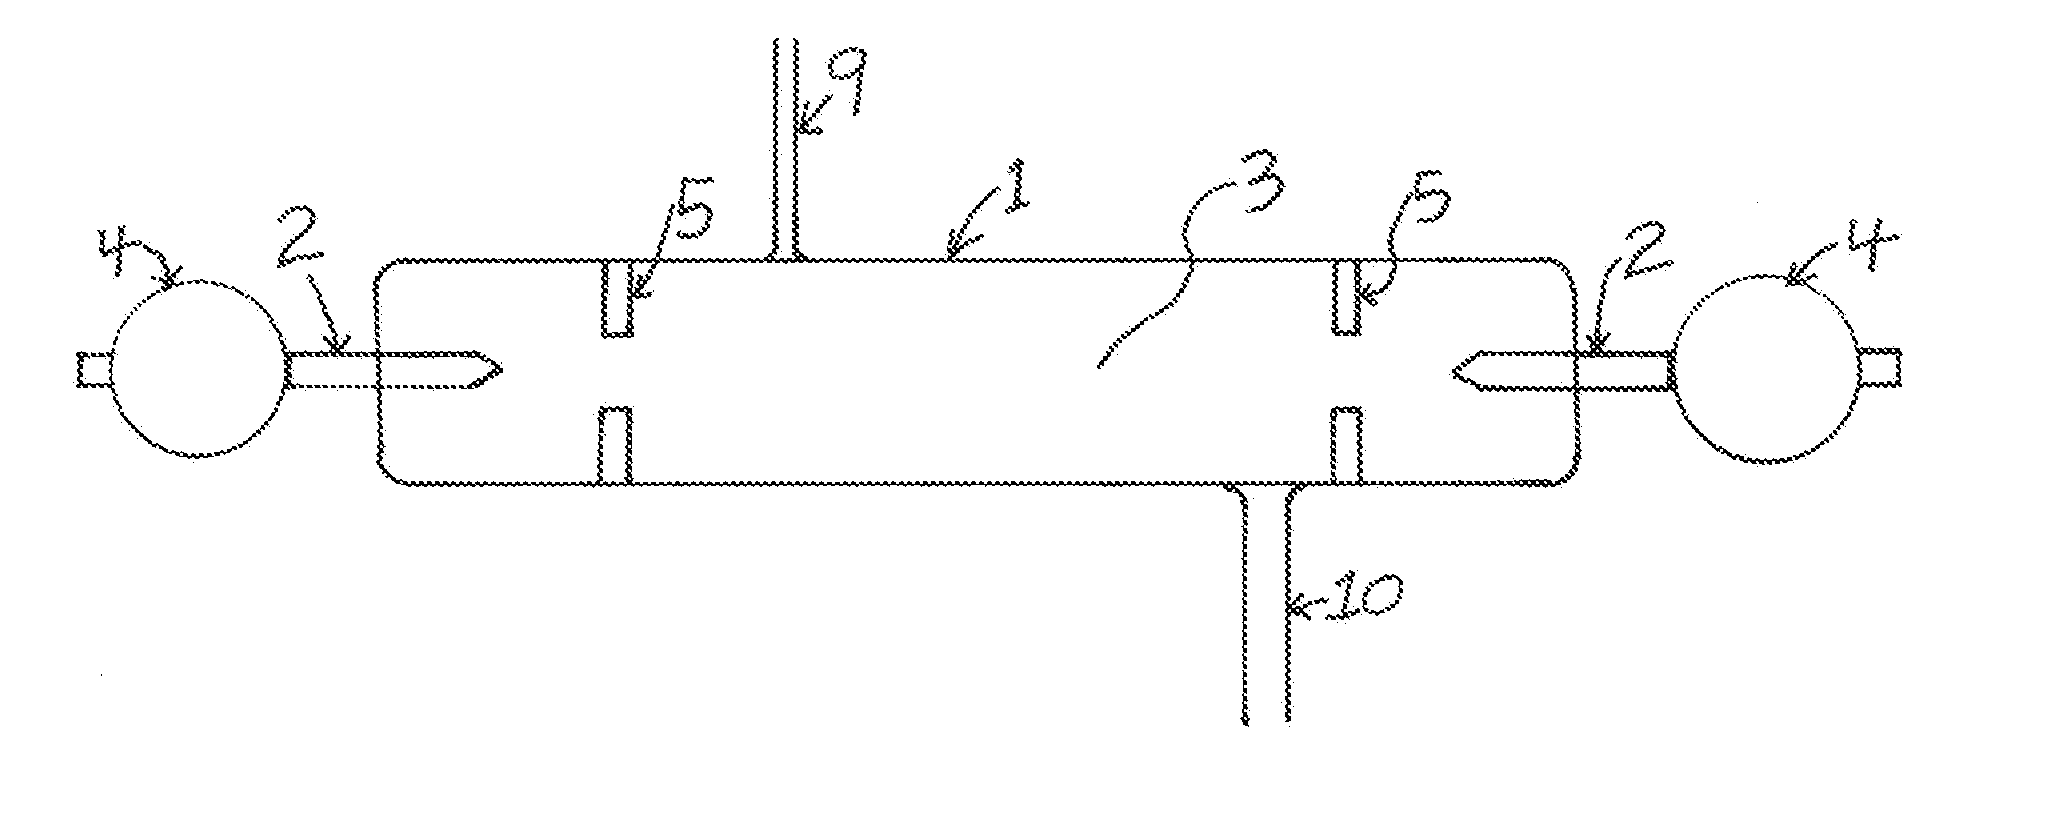 Resonant Vacuum Arc Discharge Apparatus for Nuclear Fusion